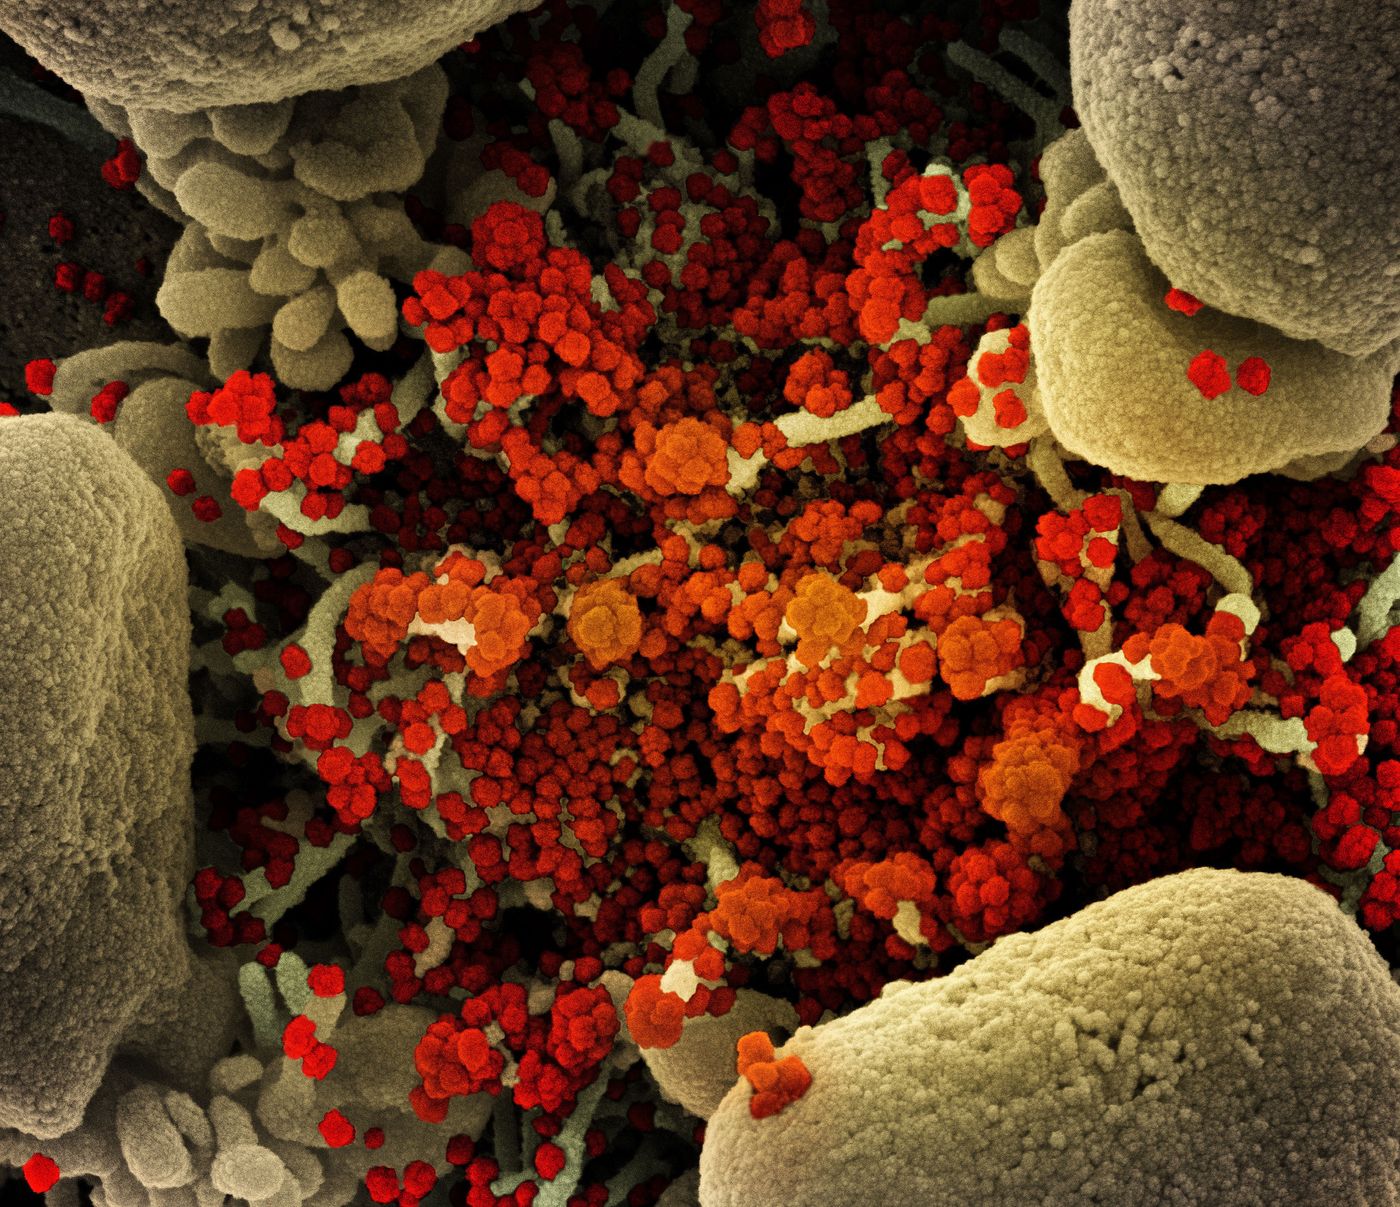 Colorized scanning electron micrograph of an apoptotic cell (tan) heavily infected with SARS-CoV-2 virus particles (orange), isolated from a patient sample. Image captured at the NIAID Integrated Research Facility (IRF) in Fort Detrick, Maryland. / Credit: NIAID